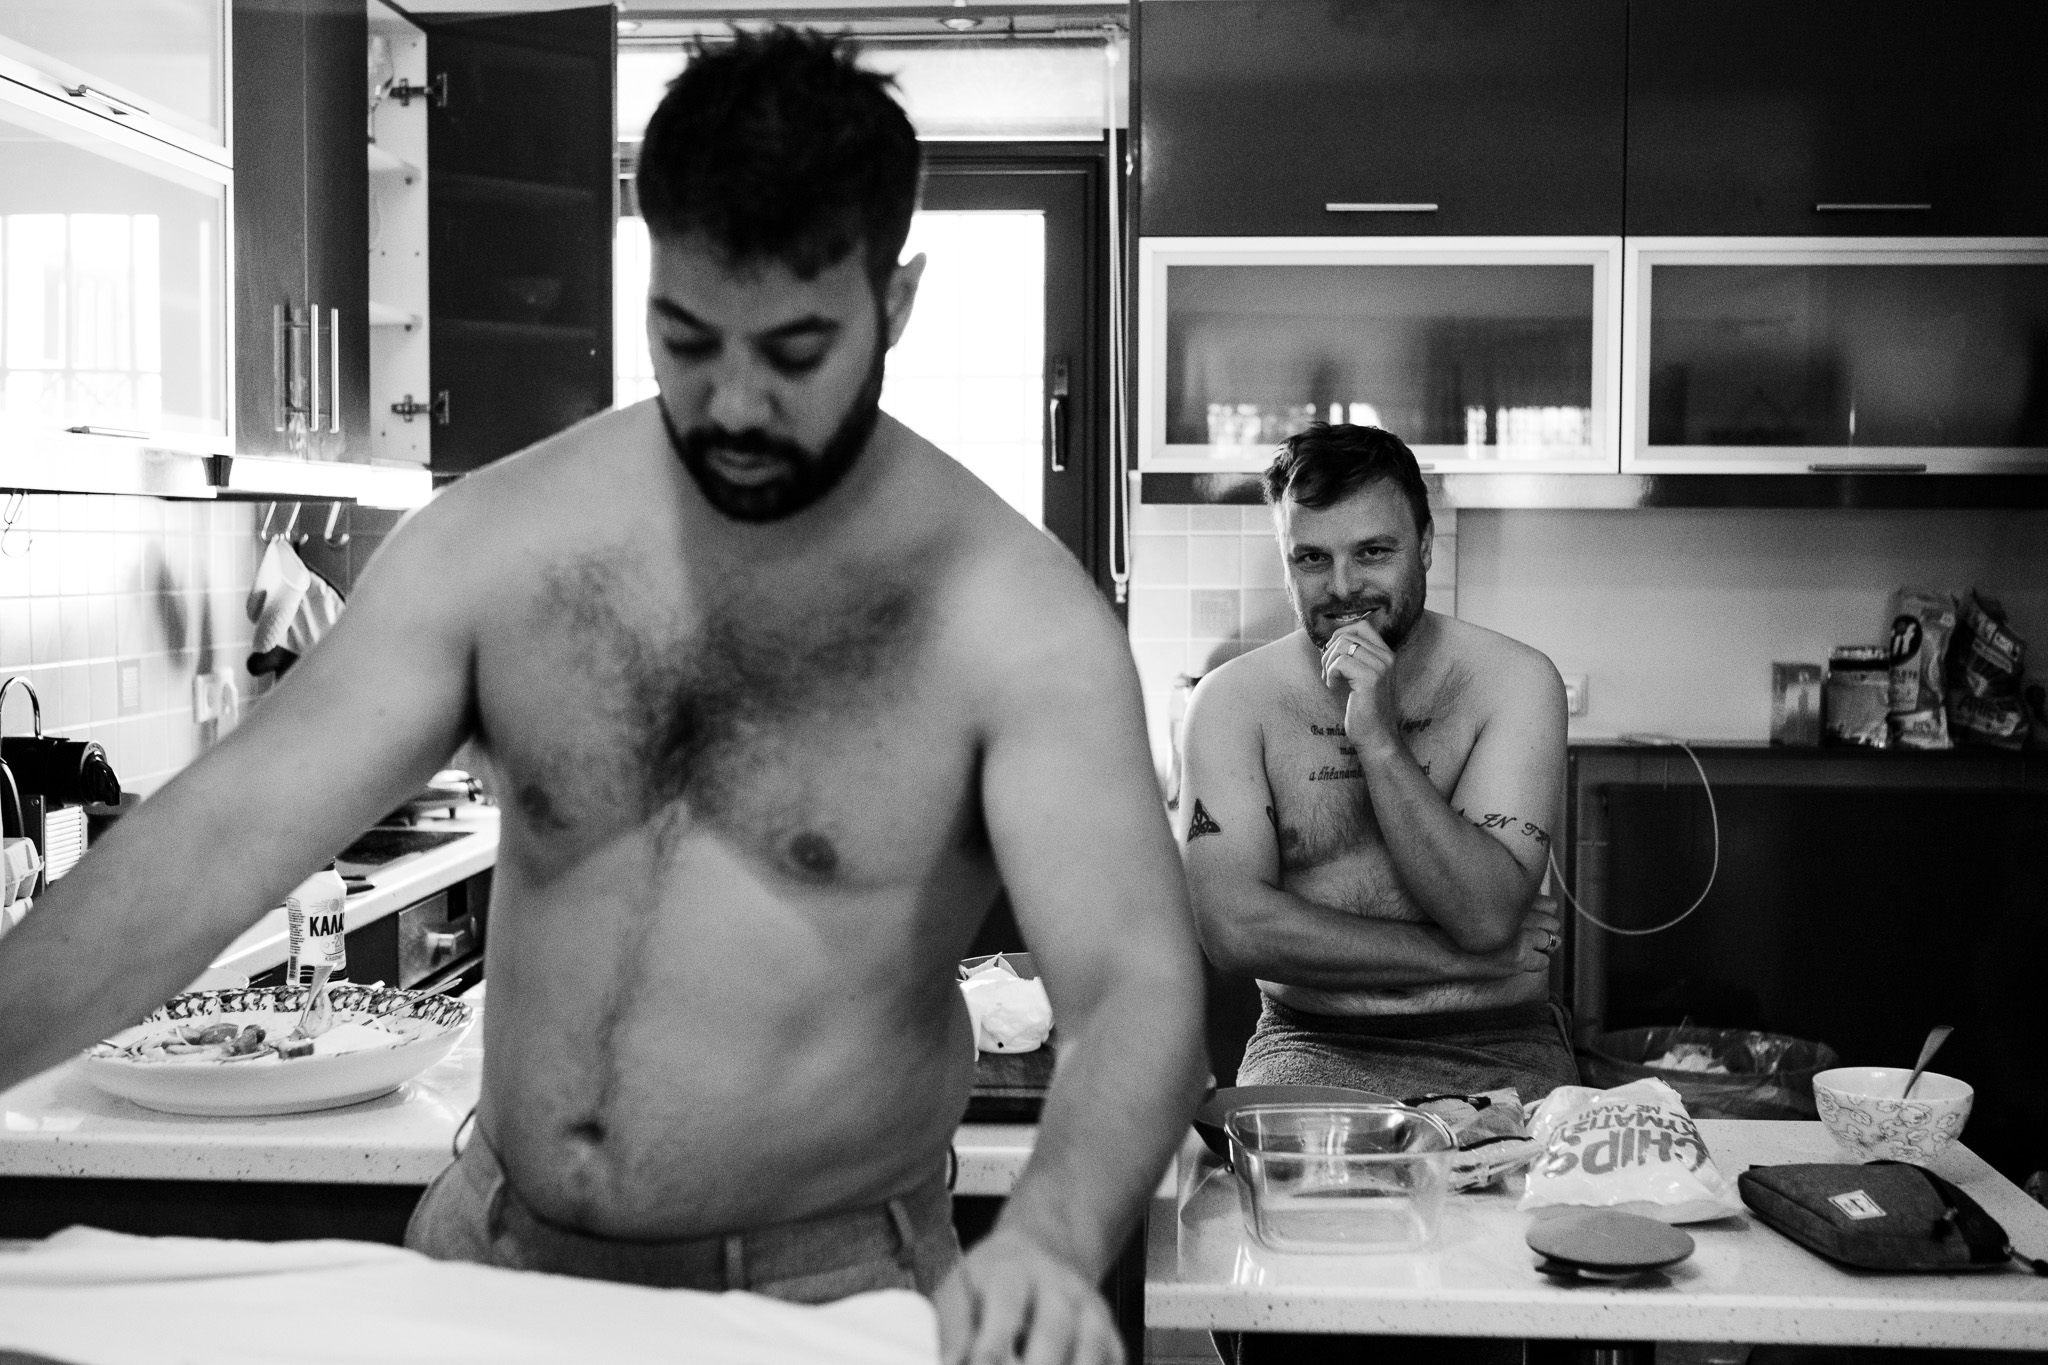 Groomsmen getting ready in the kitchen for their friend's wedding day.